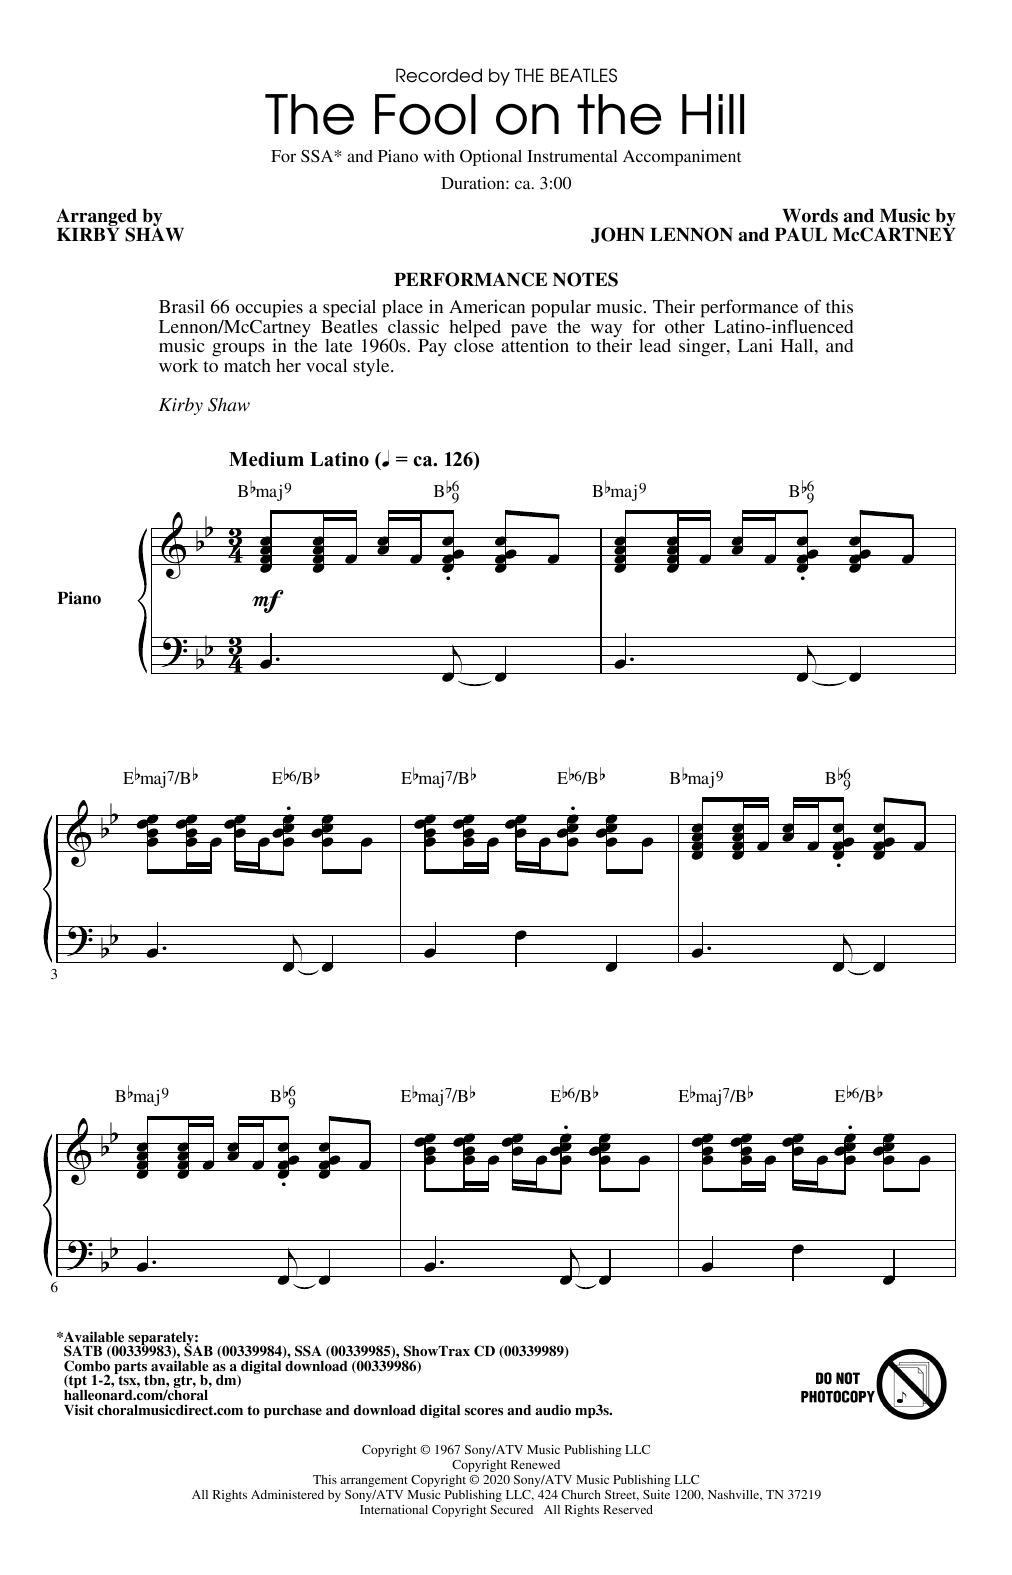 Download The Beatles The Fool On The Hill (arr. Kirby Shaw) Sheet Music